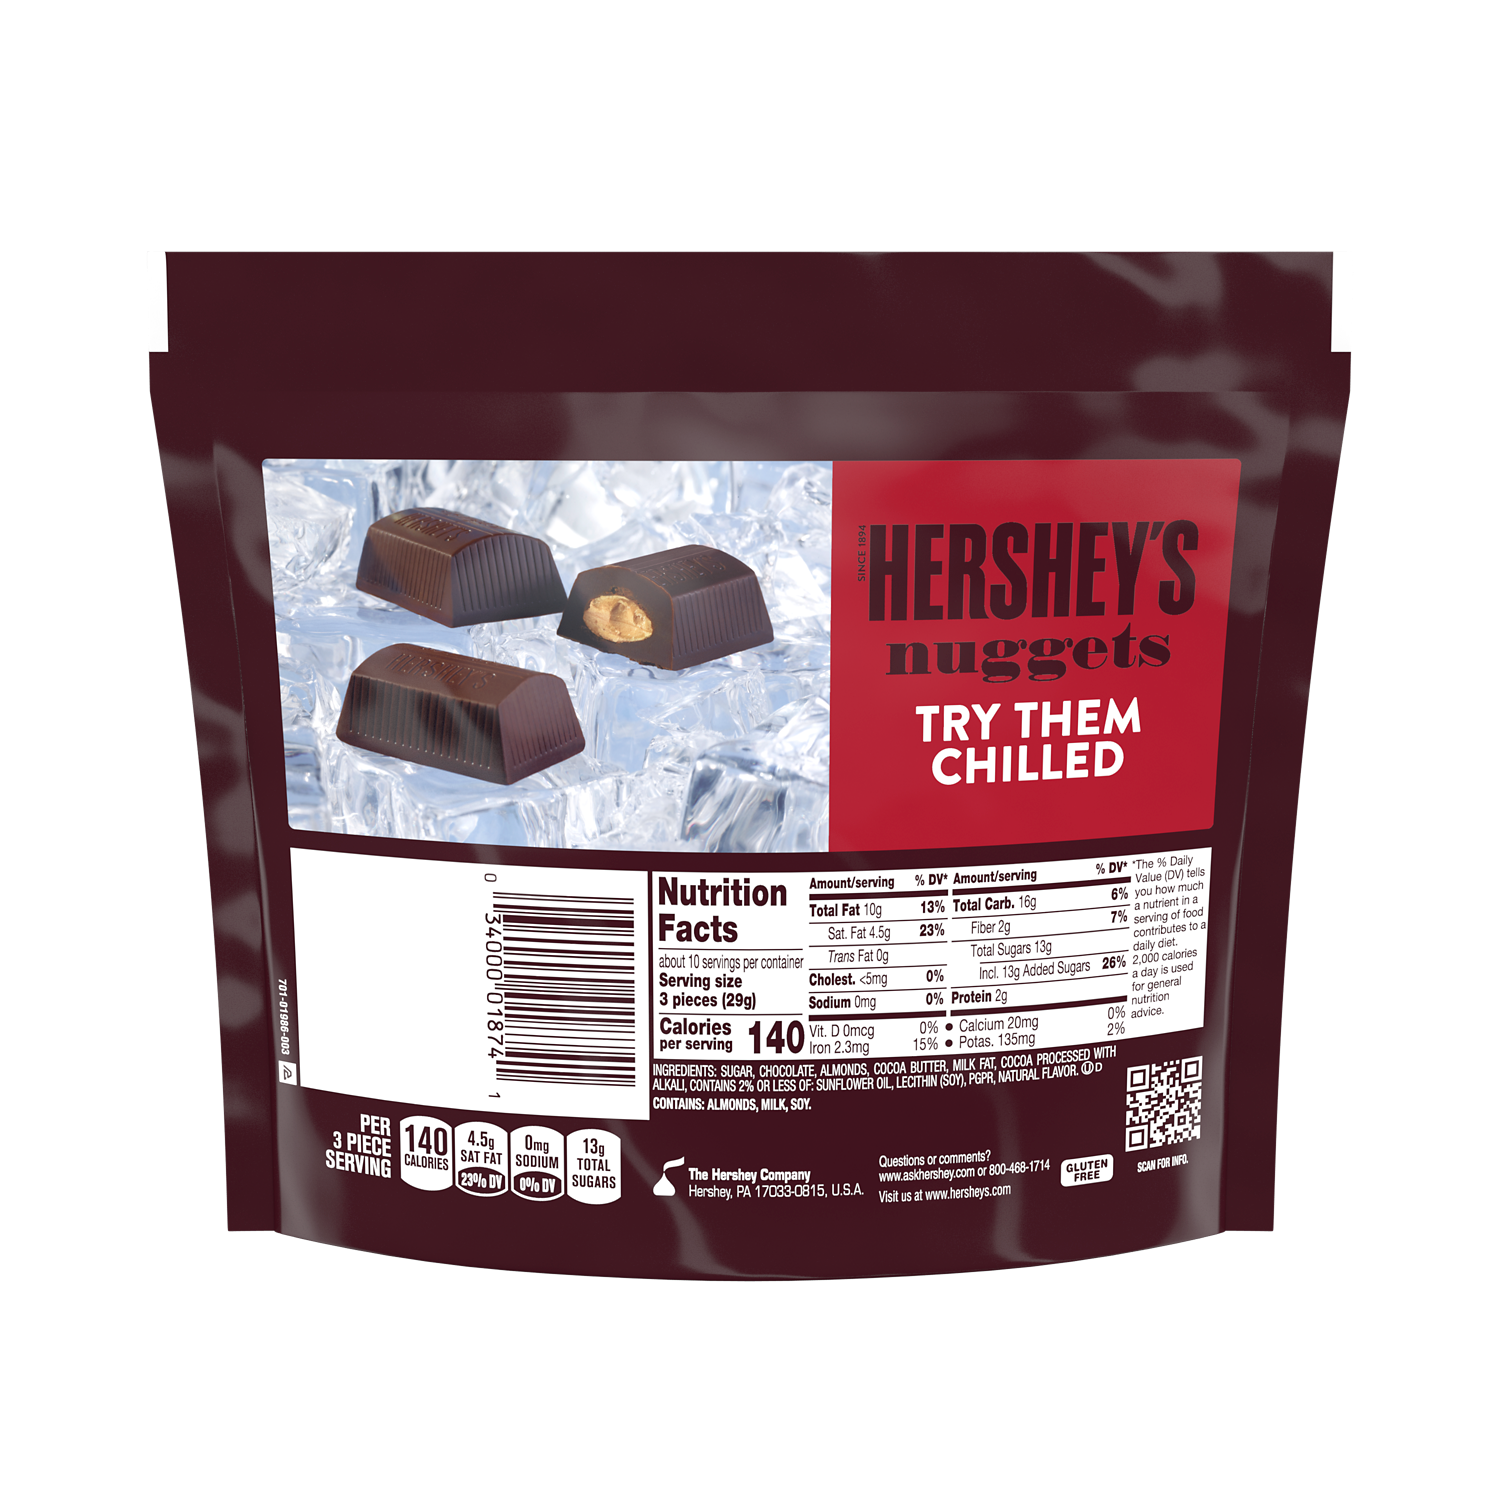 HERSHEY'S NUGGETS SPECIAL DARK Mildly Sweet Chocolate with Almonds Candy, 10.1 oz pack - Back of Package